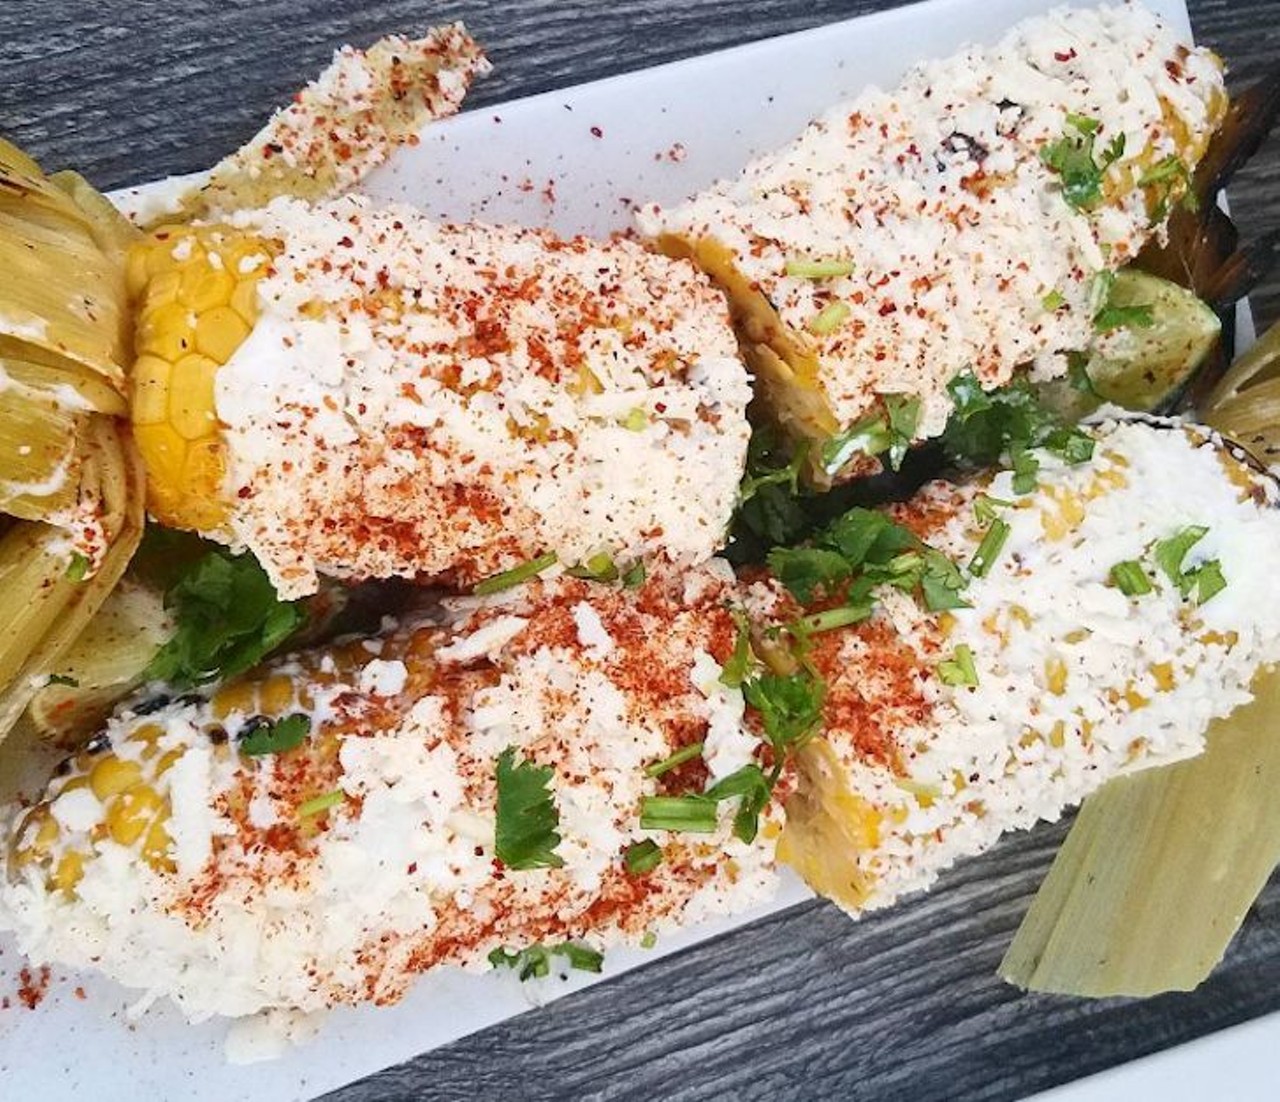 Must Try: Mexican Street Corn 
Photo via chefhollywog/Instagram